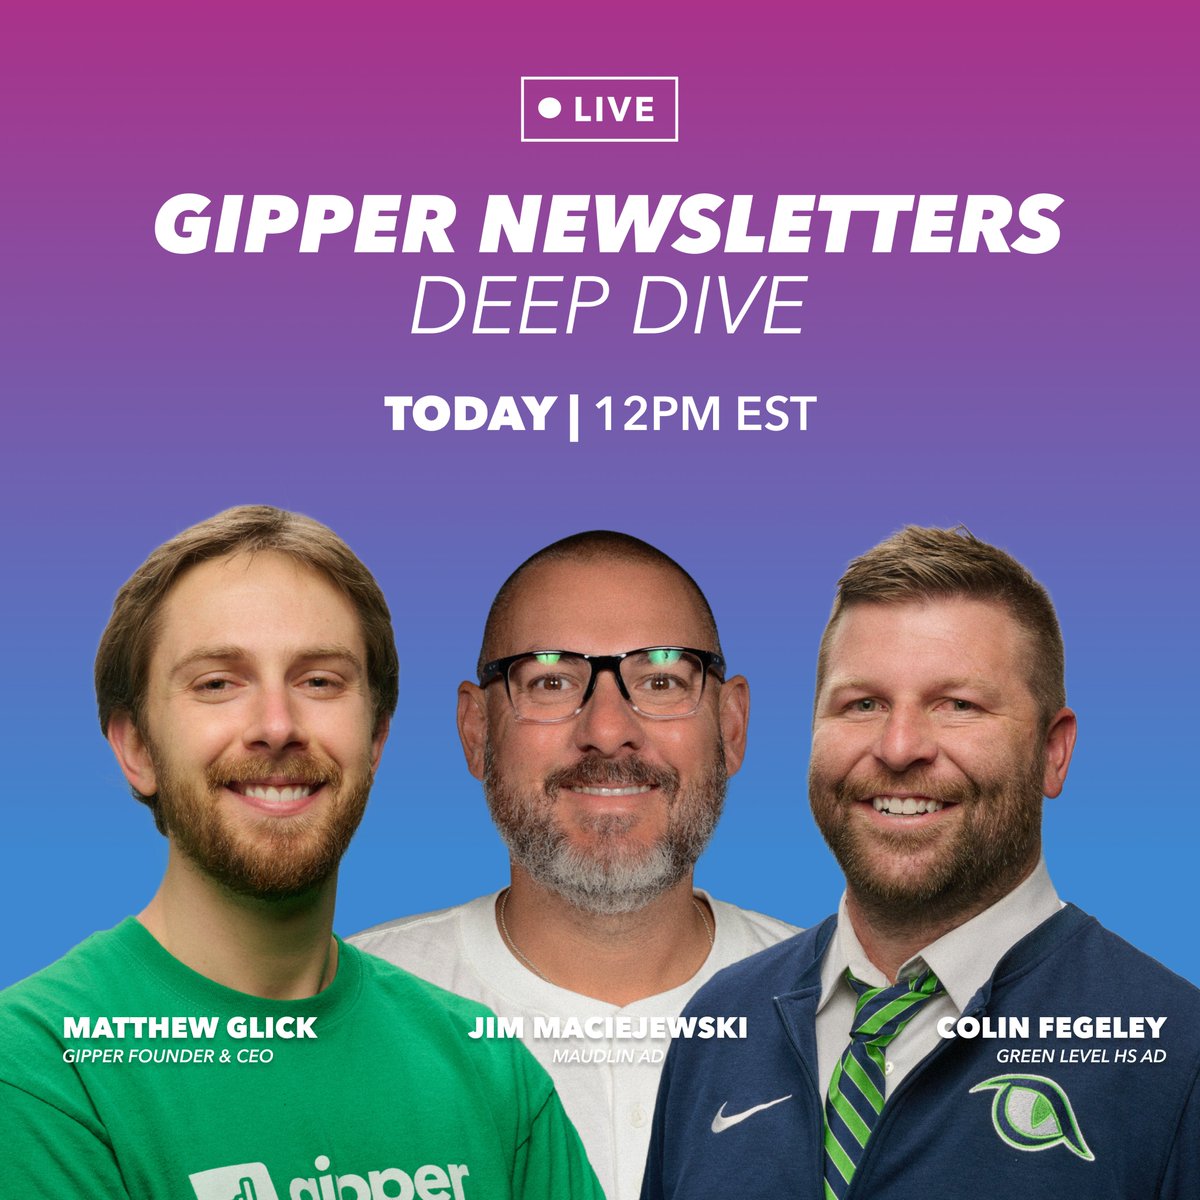 TODAY'S THE DAY🟣⚡️ Last chance to sign up for our #GipperNewsletters Deep Dive Webinar today! Sign up here: bit.ly/44HpBDY Join Gipper Founder & CEO @matthewaglick, @G_L_ATHLETICS AD, and @Mauldin_Athl AD to learn how Gipper is leveling up the newsletter game ⚡️